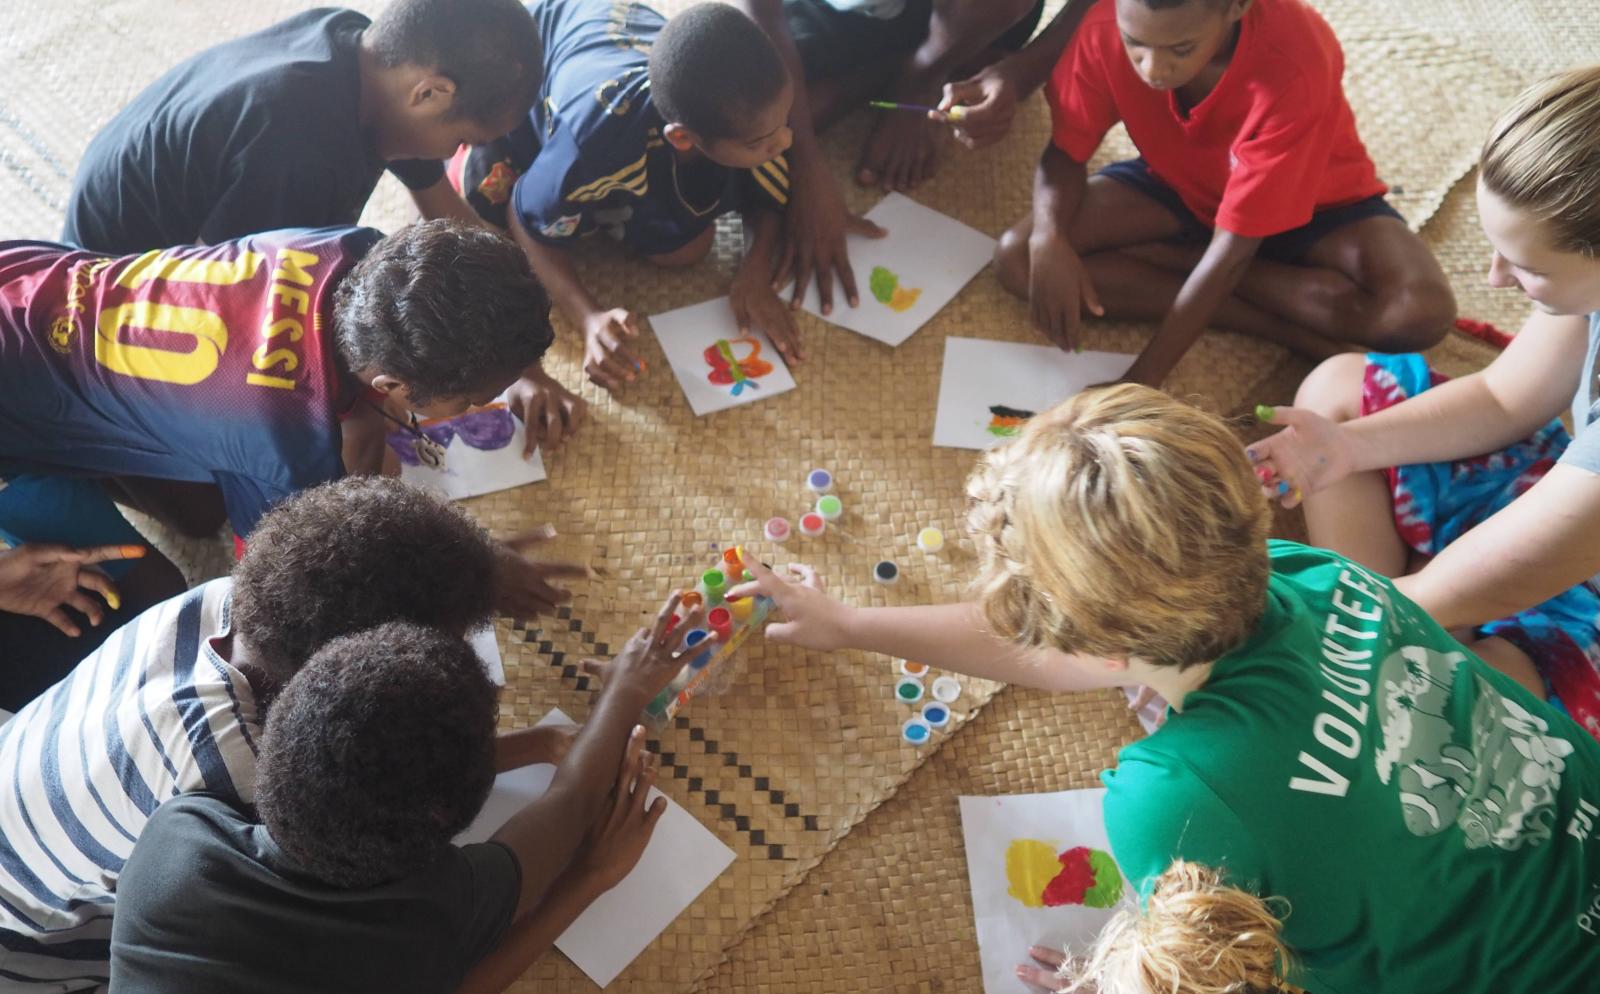 Projects Abroad volunteers play educational games with children from a nursery school rather than an orphanage abroad